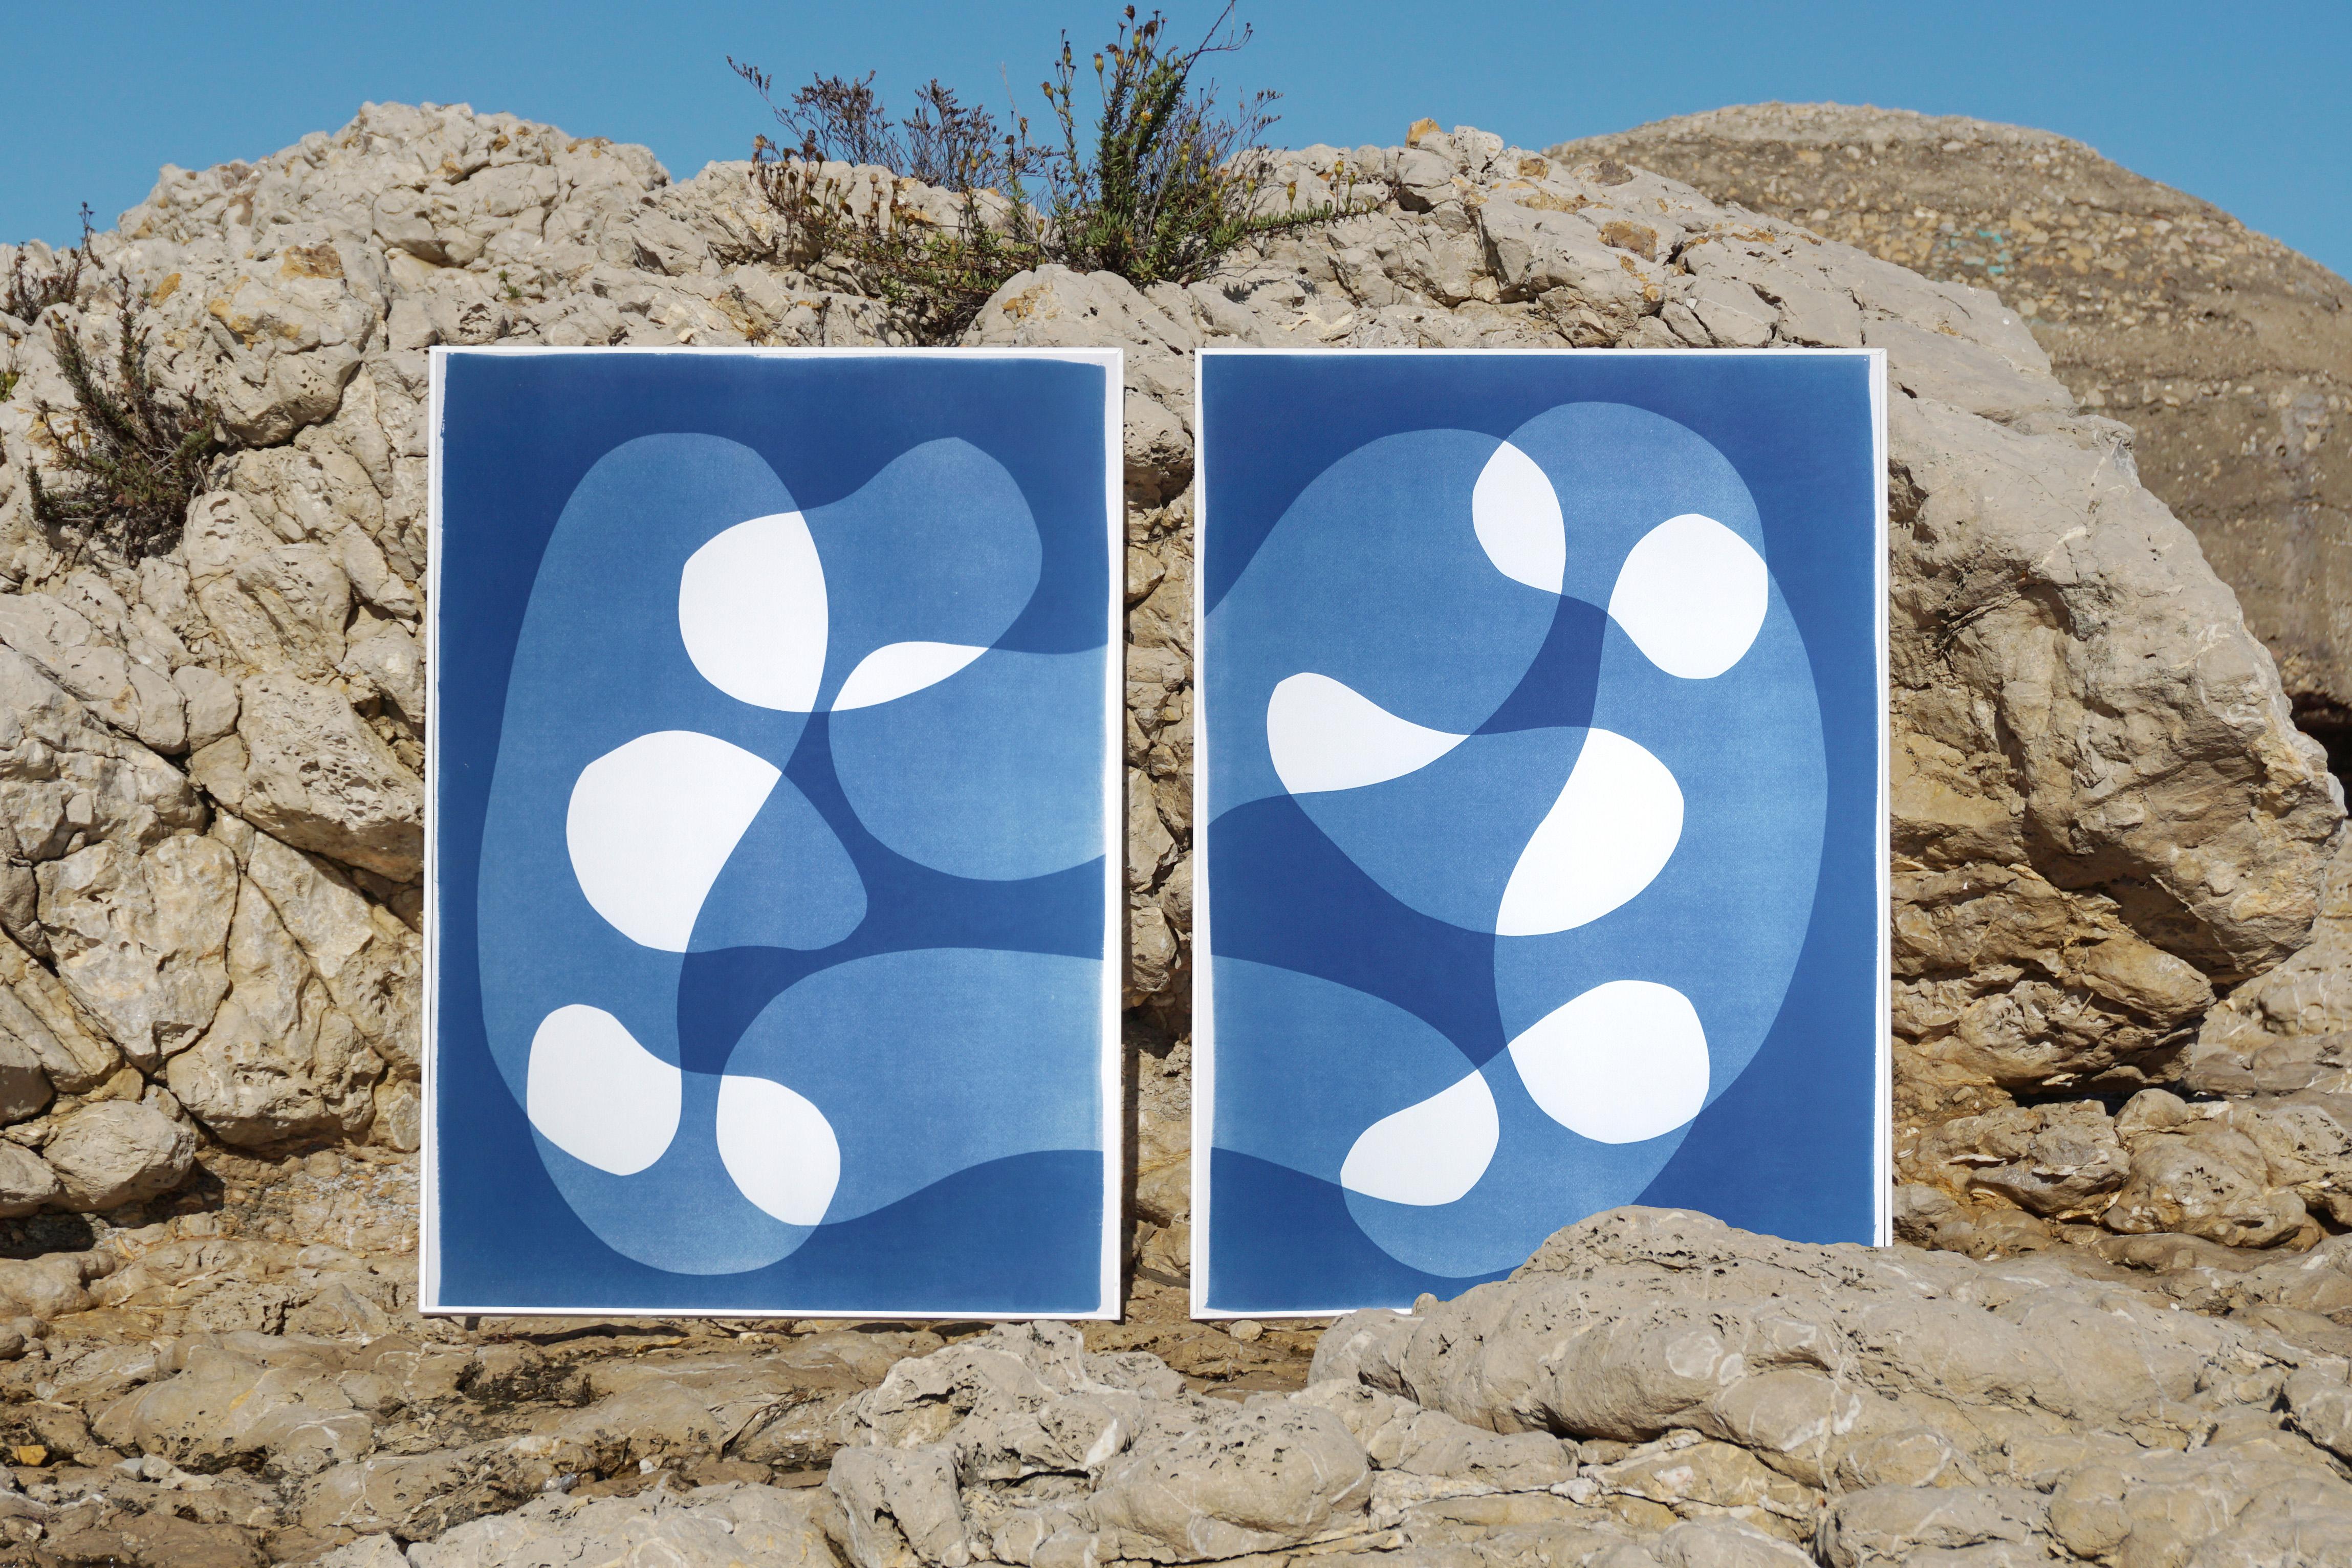 Large Diptych, Unique Piece in Blue Tones, Fish on a Hook, Abstract Shapes 2022  - American Modern Photograph by Kind of Cyan